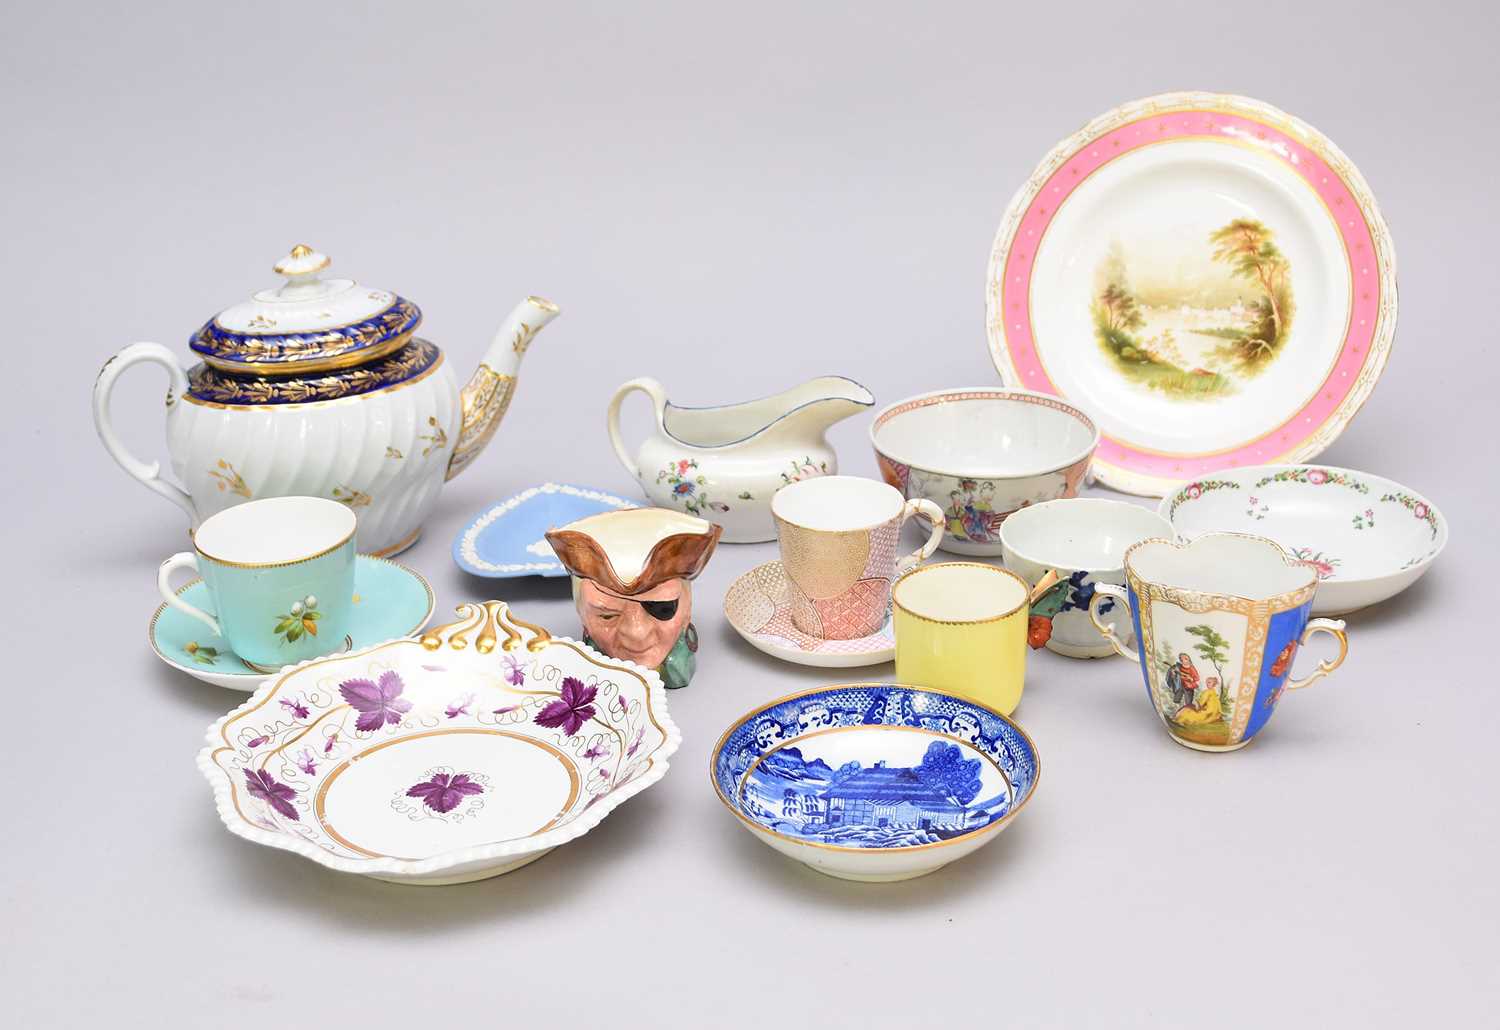 A collection of English pottery and porcelain, predominantly 19th century